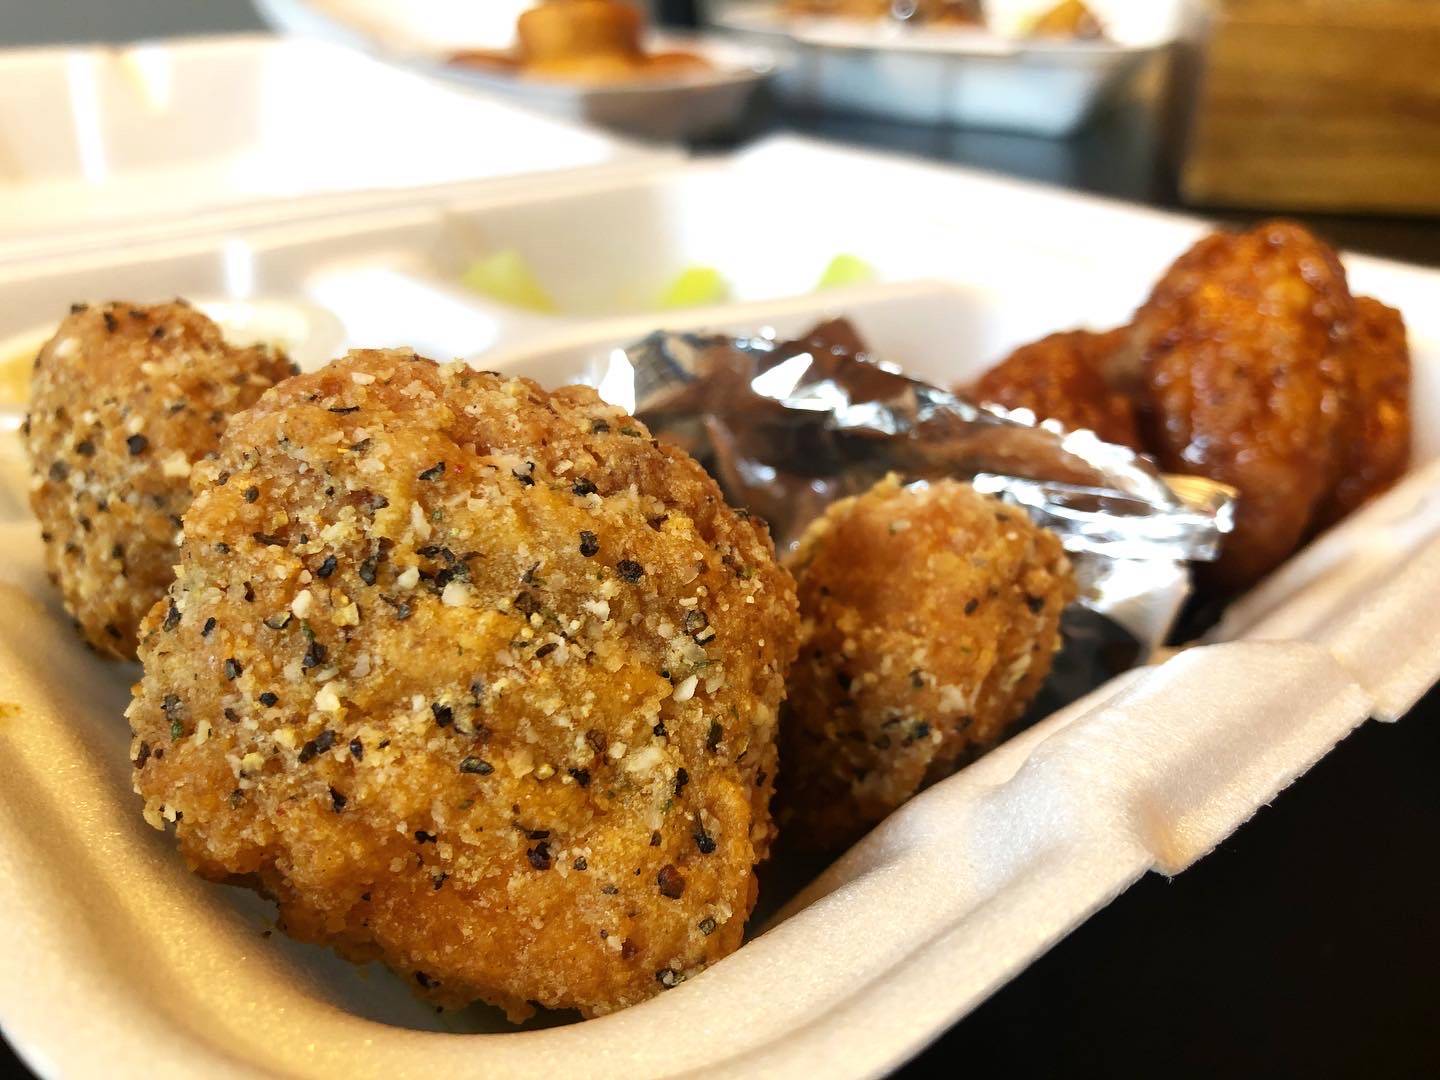 A close up of five boneless wings with a parmesan garlic dry rub. Photo by Alyssa Buckley.